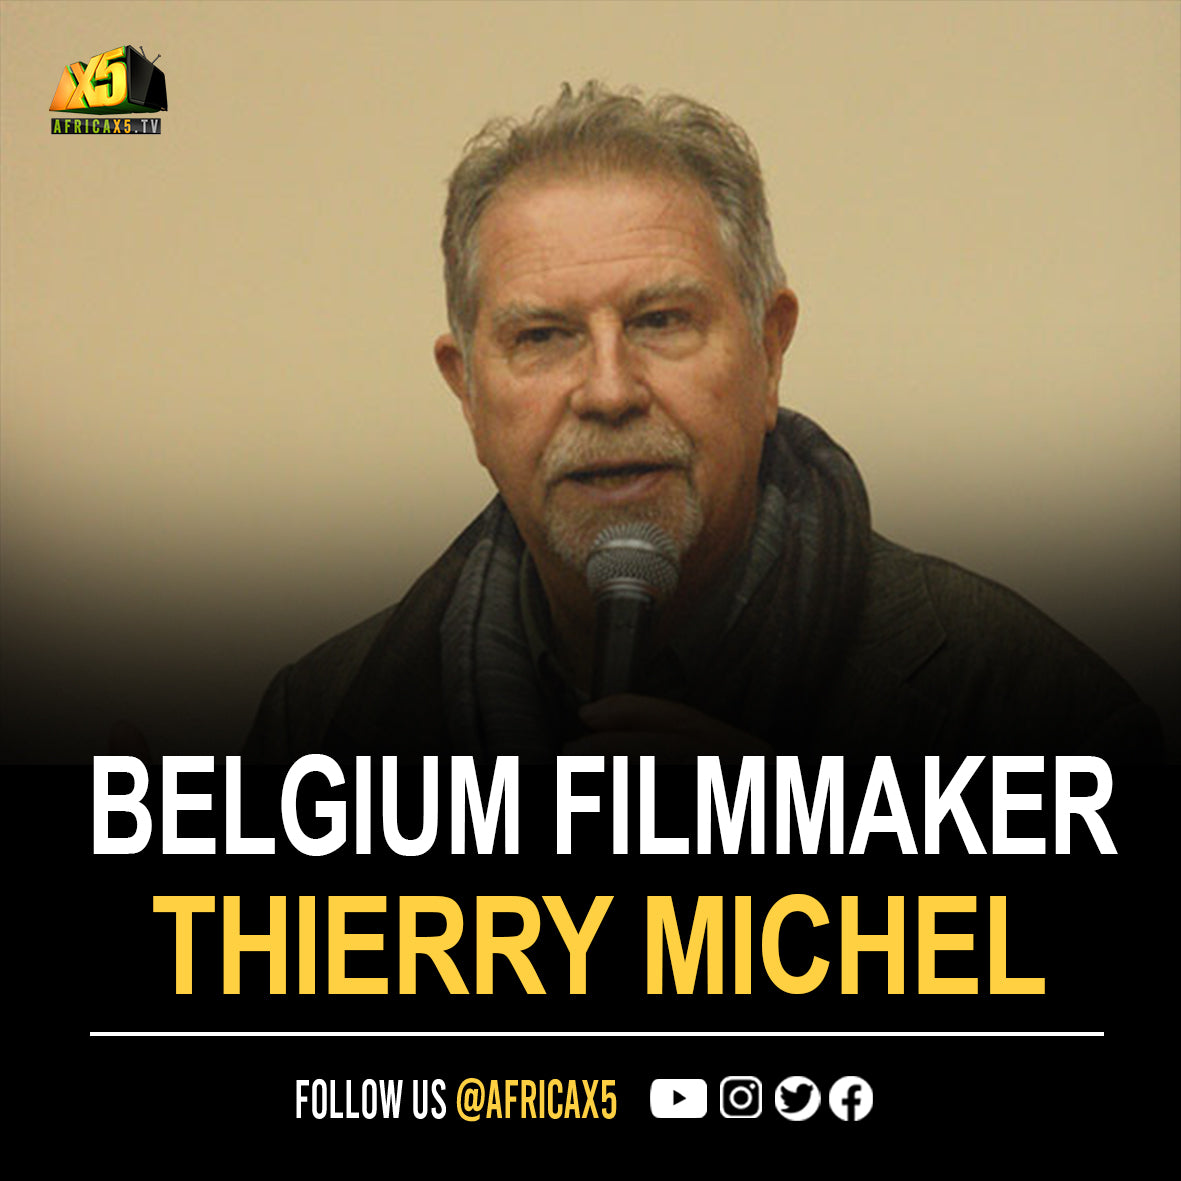 Belgian Filmmaker,Thierry Michel,  Accused of Stealing Life Story of Congolese People Exploiting them for Profit